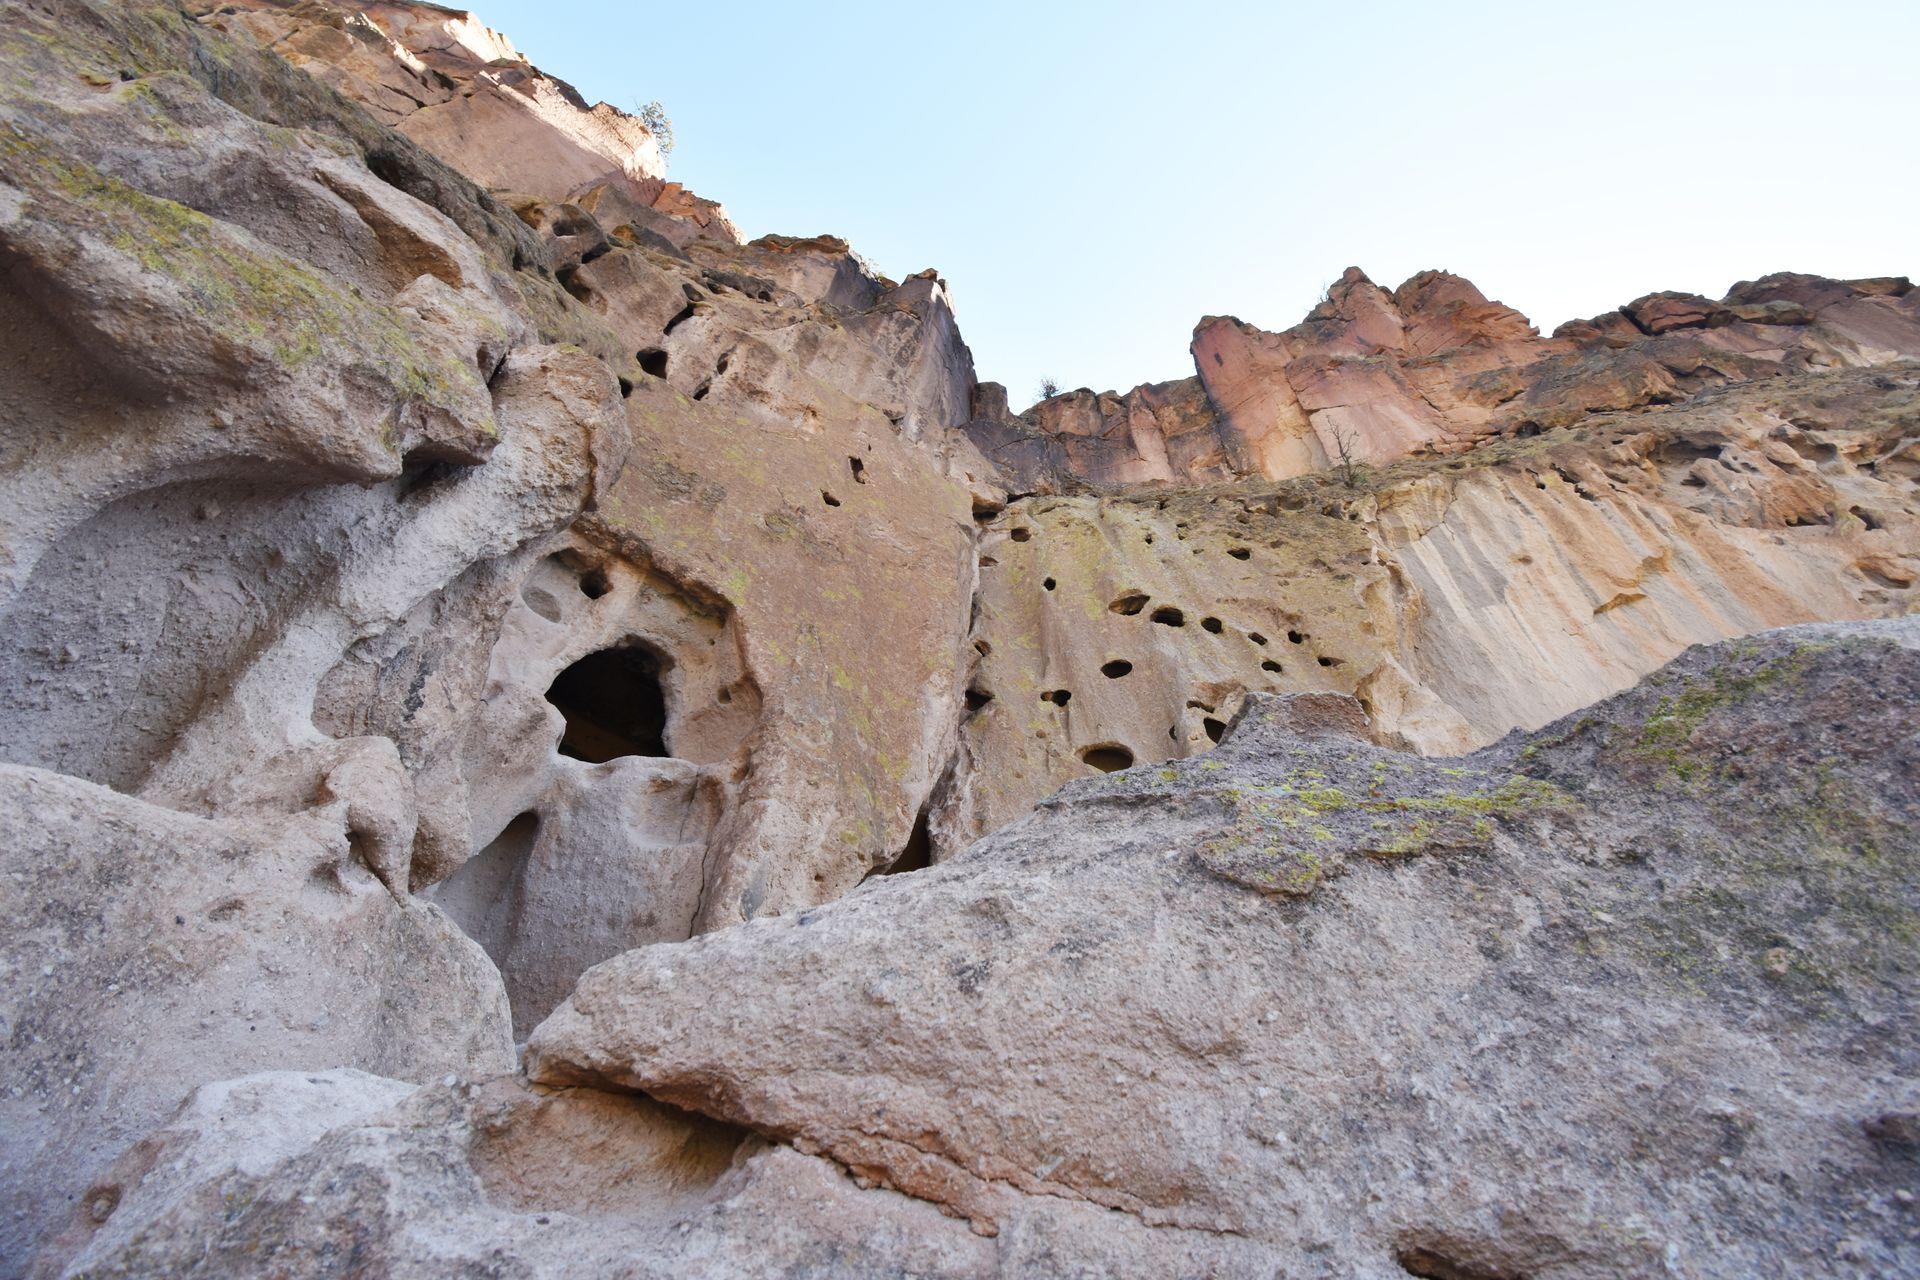 Looking up at a rock face with some interesting holes in it at Bandelier National Monument.